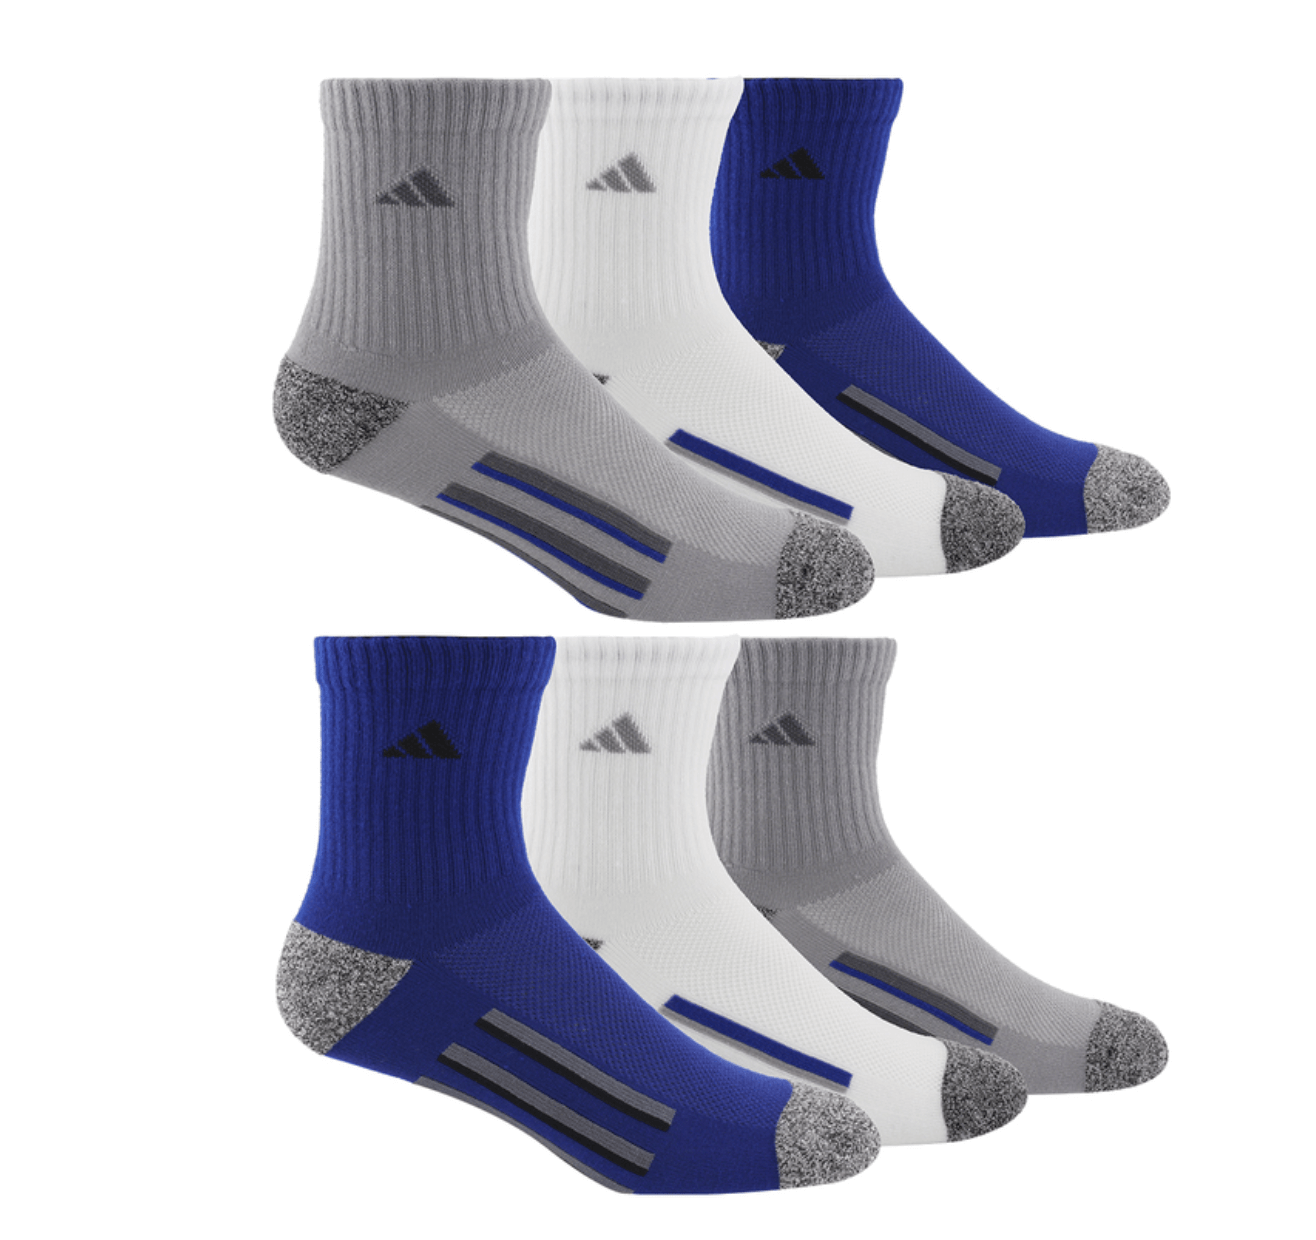 Adidas Boy's Socks six pack in Blue and Grey.